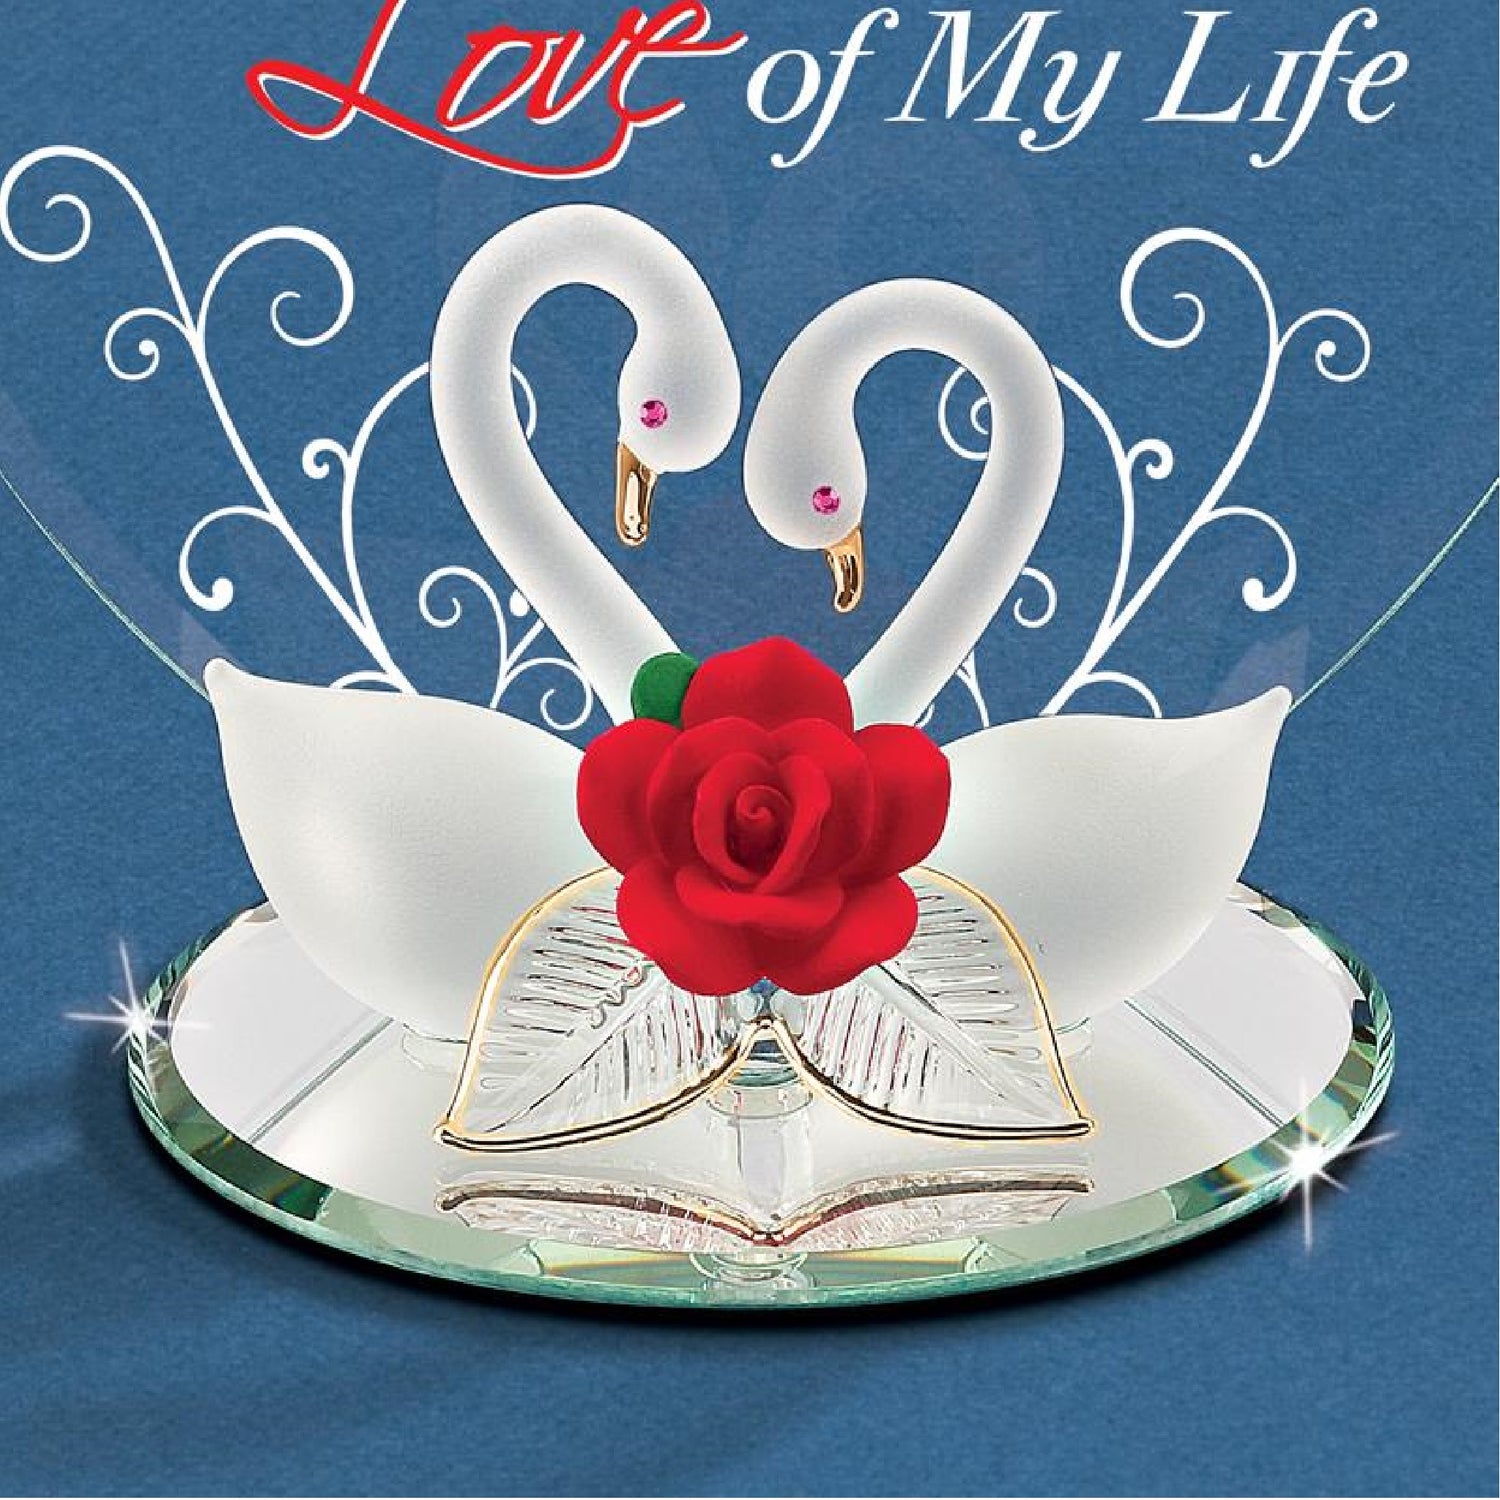 Glass Baron Swans "Love Of My Life" Plaque